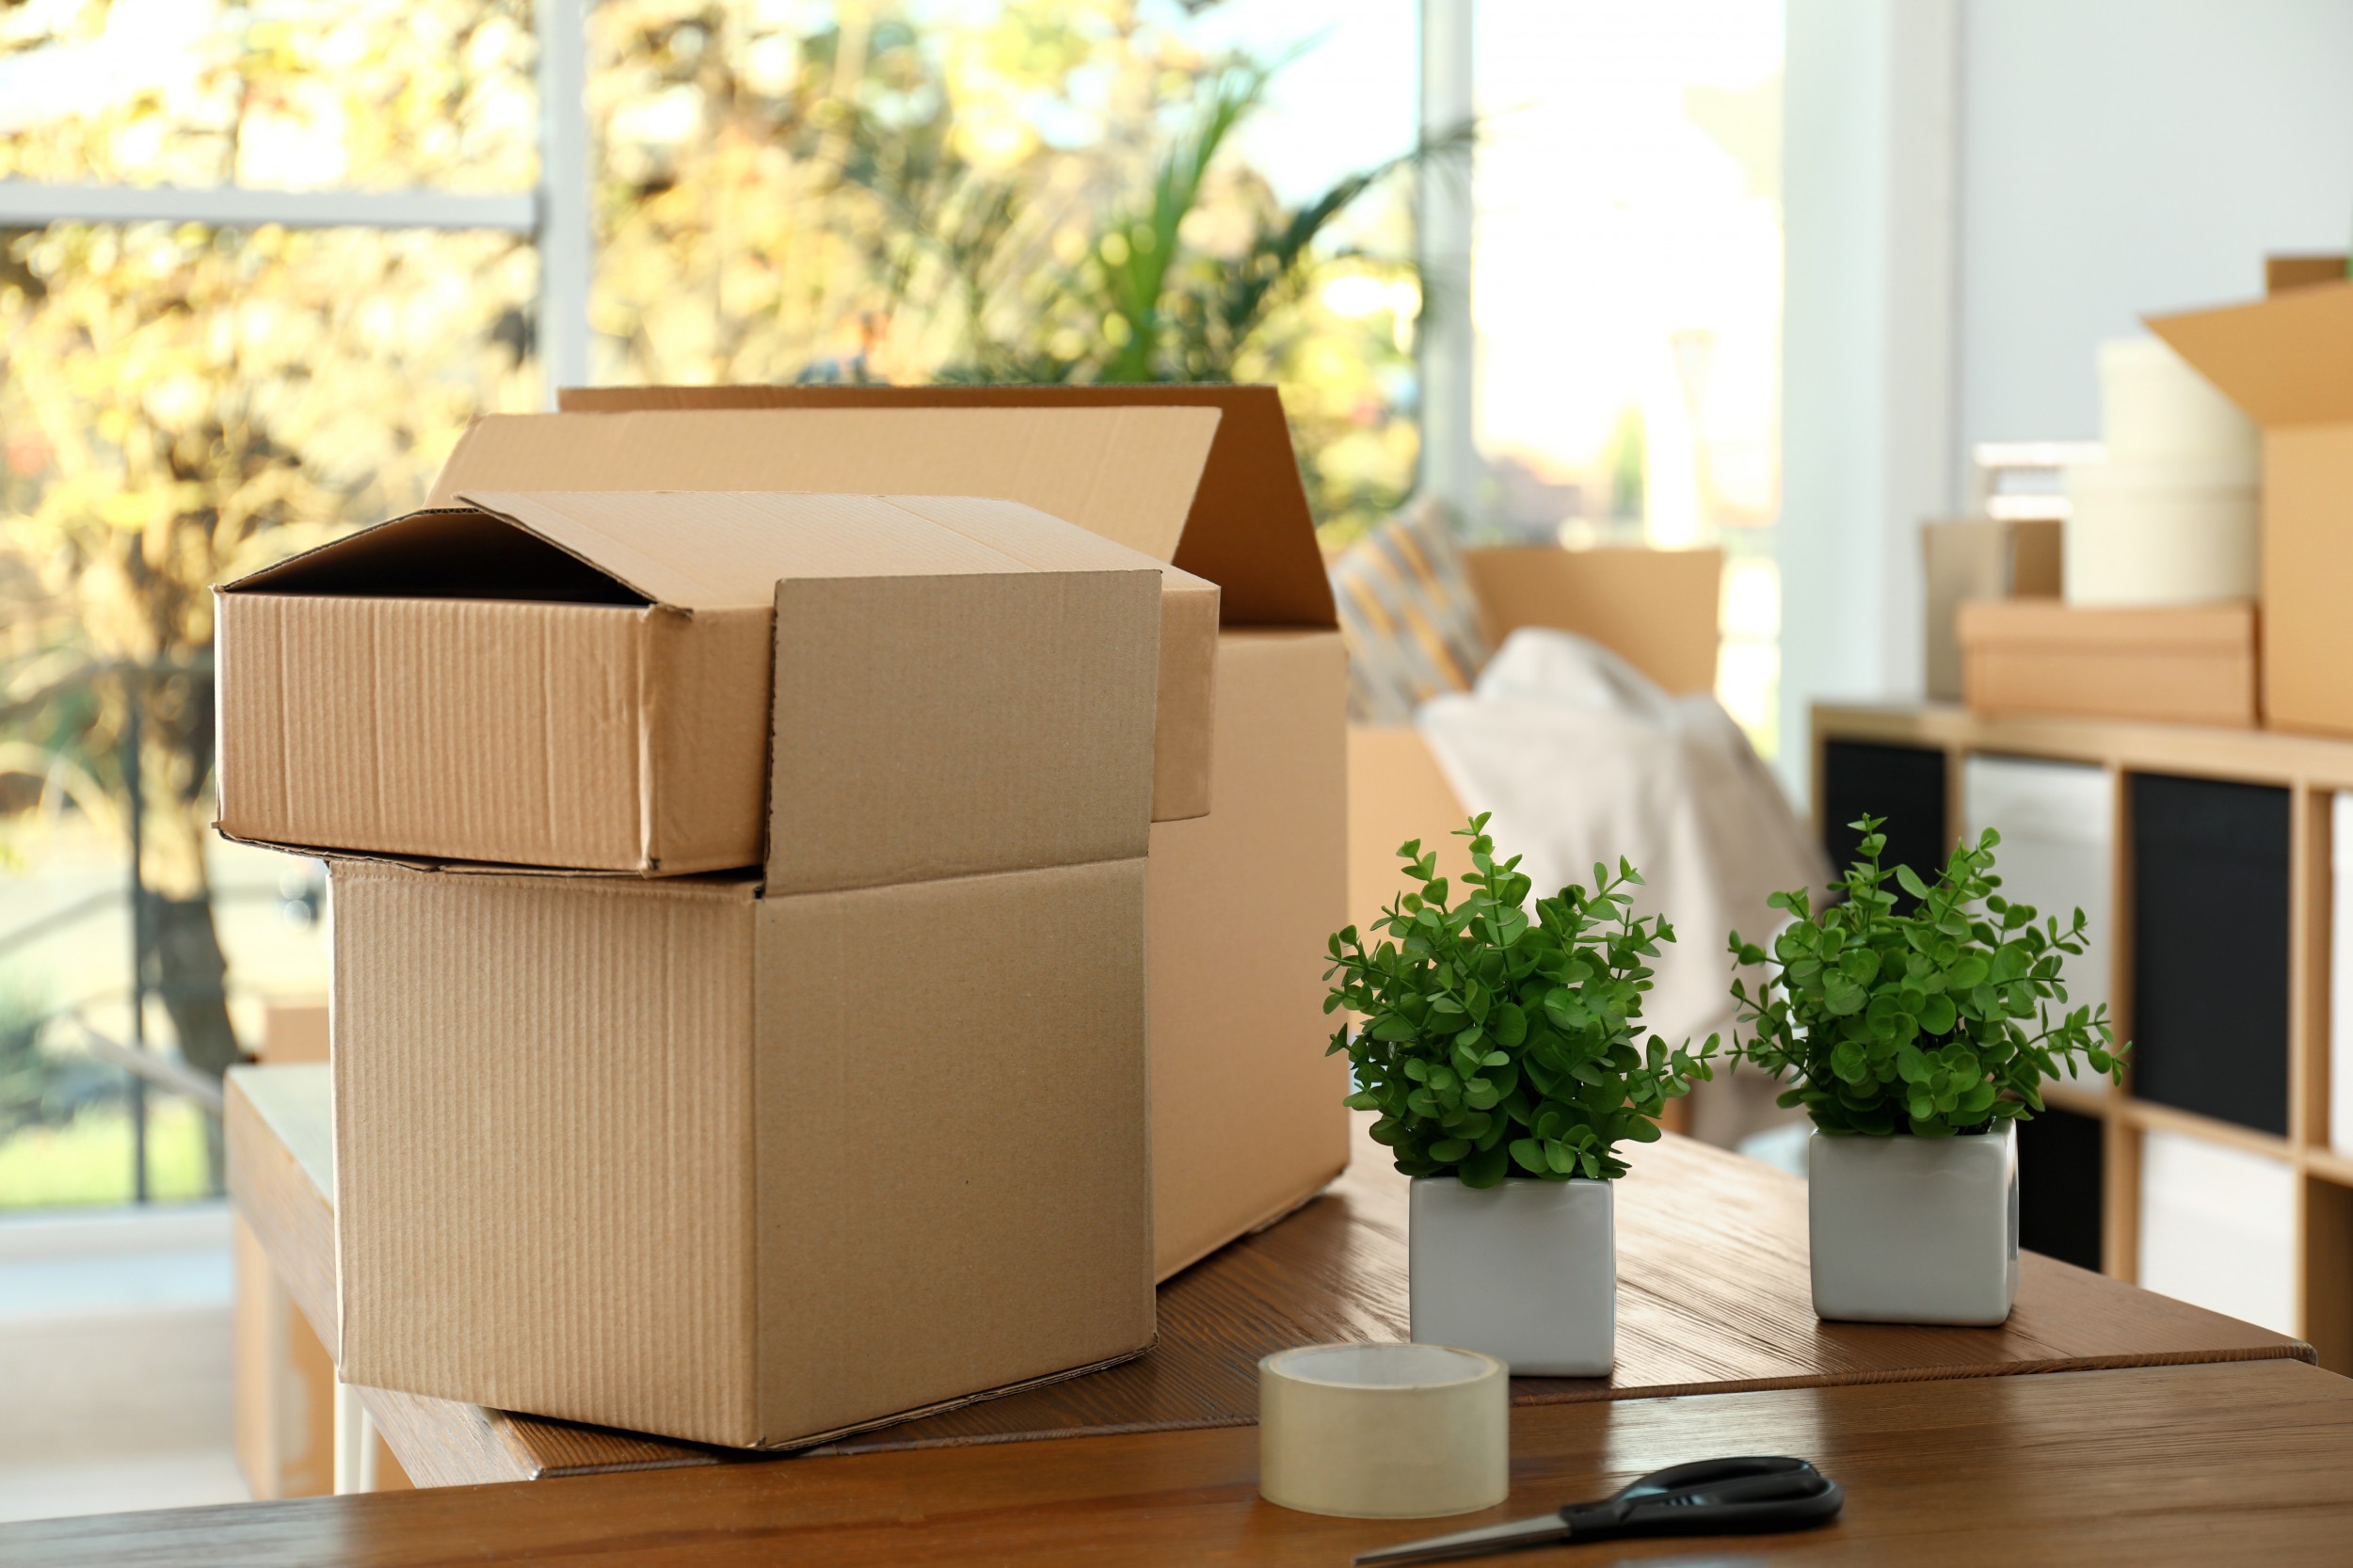 Finding the Perfect Removal Firm for Your Move